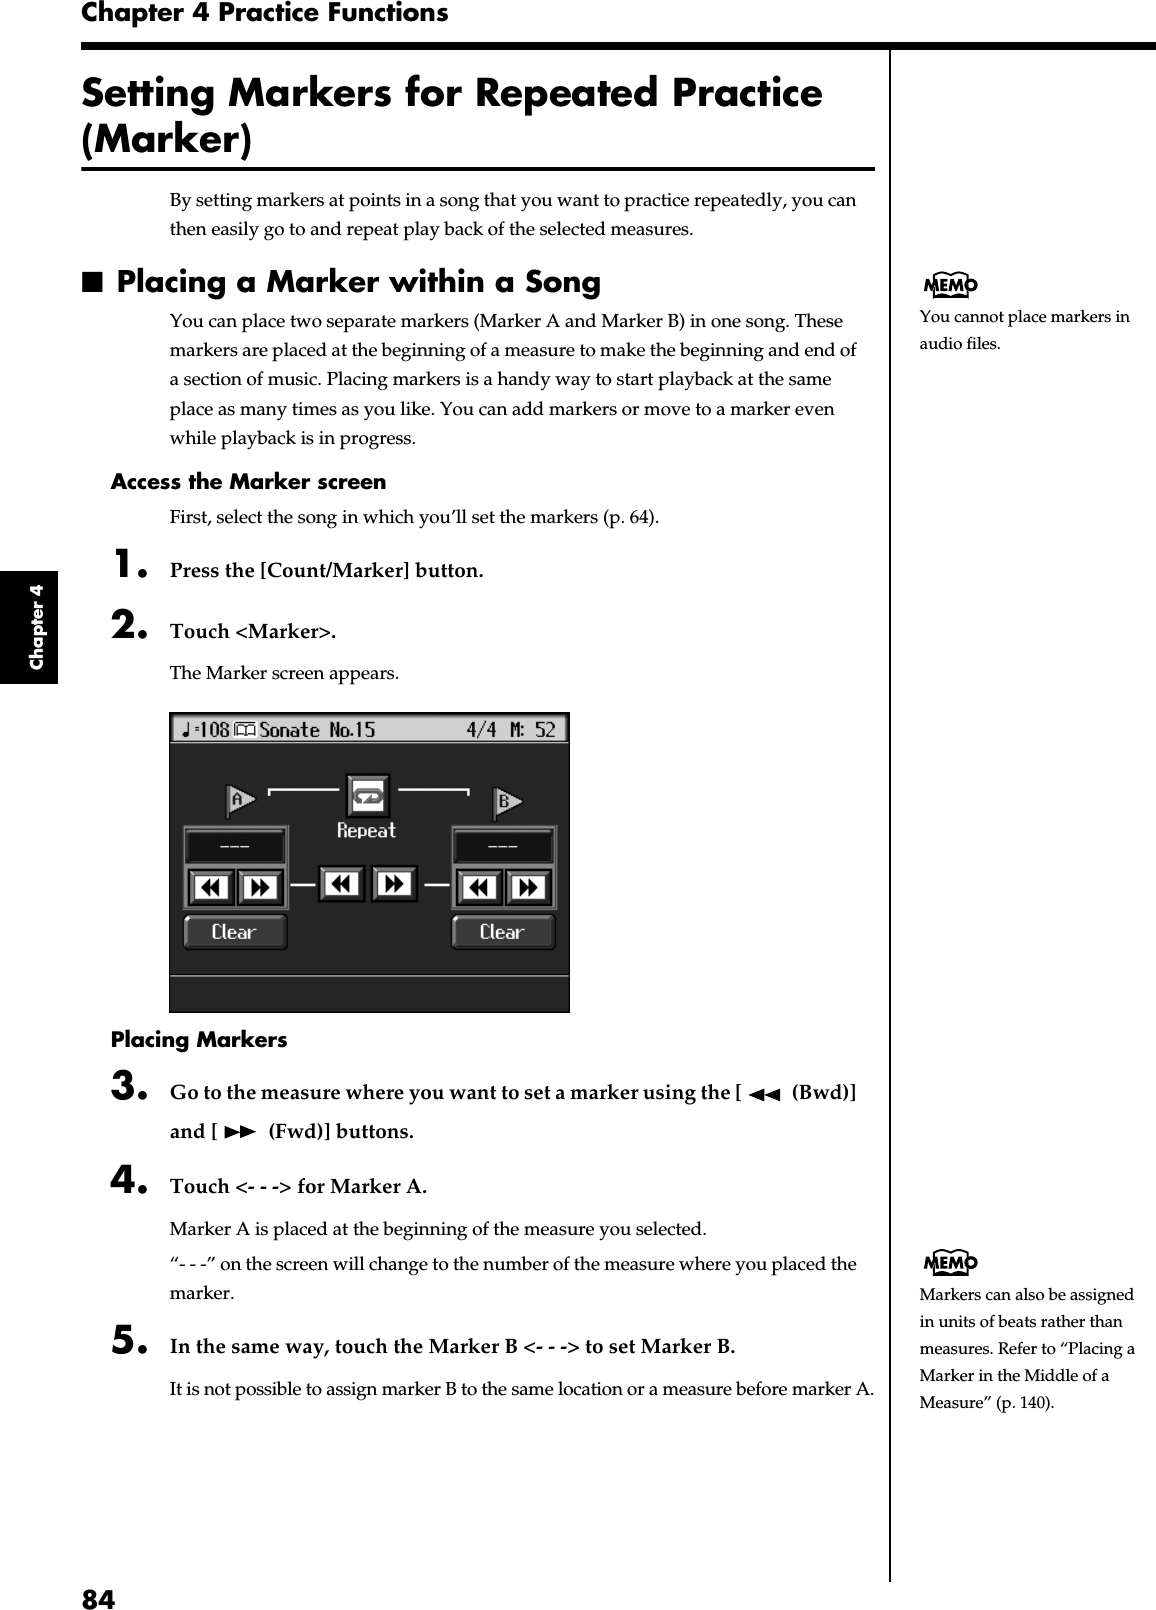 84Chapter 4 Practice FunctionsChapter 4Setting Markers for Repeated Practice (Marker)By setting markers at points in a song that you want to practice repeatedly, you can then easily go to and repeat play back of the selected measures. ■Placing a Marker within a SongYou can place two separate markers (Marker A and Marker B) in one song. These markers are placed at the beginning of a measure to make the beginning and end of a section of music. Placing markers is a handy way to start playback at the same place as many times as you like. You can add markers or move to a marker even while playback is in progress.Access the Marker screenFirst, select the song in which you’ll set the markers (p. 64).1. Press the [Count/Marker] button. 2. Touch &lt;Marker&gt;.The Marker screen appears. fig.d-marker.eps_60Placing Markers3. Go to the measure where you want to set a marker using the [  (Bwd)] and [  (Fwd)] buttons.4. Touch &lt;- - -&gt; for Marker A.Marker A is placed at the beginning of the measure you selected.“- - -” on the screen will change to the number of the measure where you placed the marker. 5. In the same way, touch the Marker B &lt;- - -&gt; to set Marker B.It is not possible to assign marker B to the same location or a measure before marker A.You cannot place markers in audio files.Markers can also be assigned in units of beats rather than measures. Refer to “Placing a Marker in the Middle of a Measure” (p. 140).